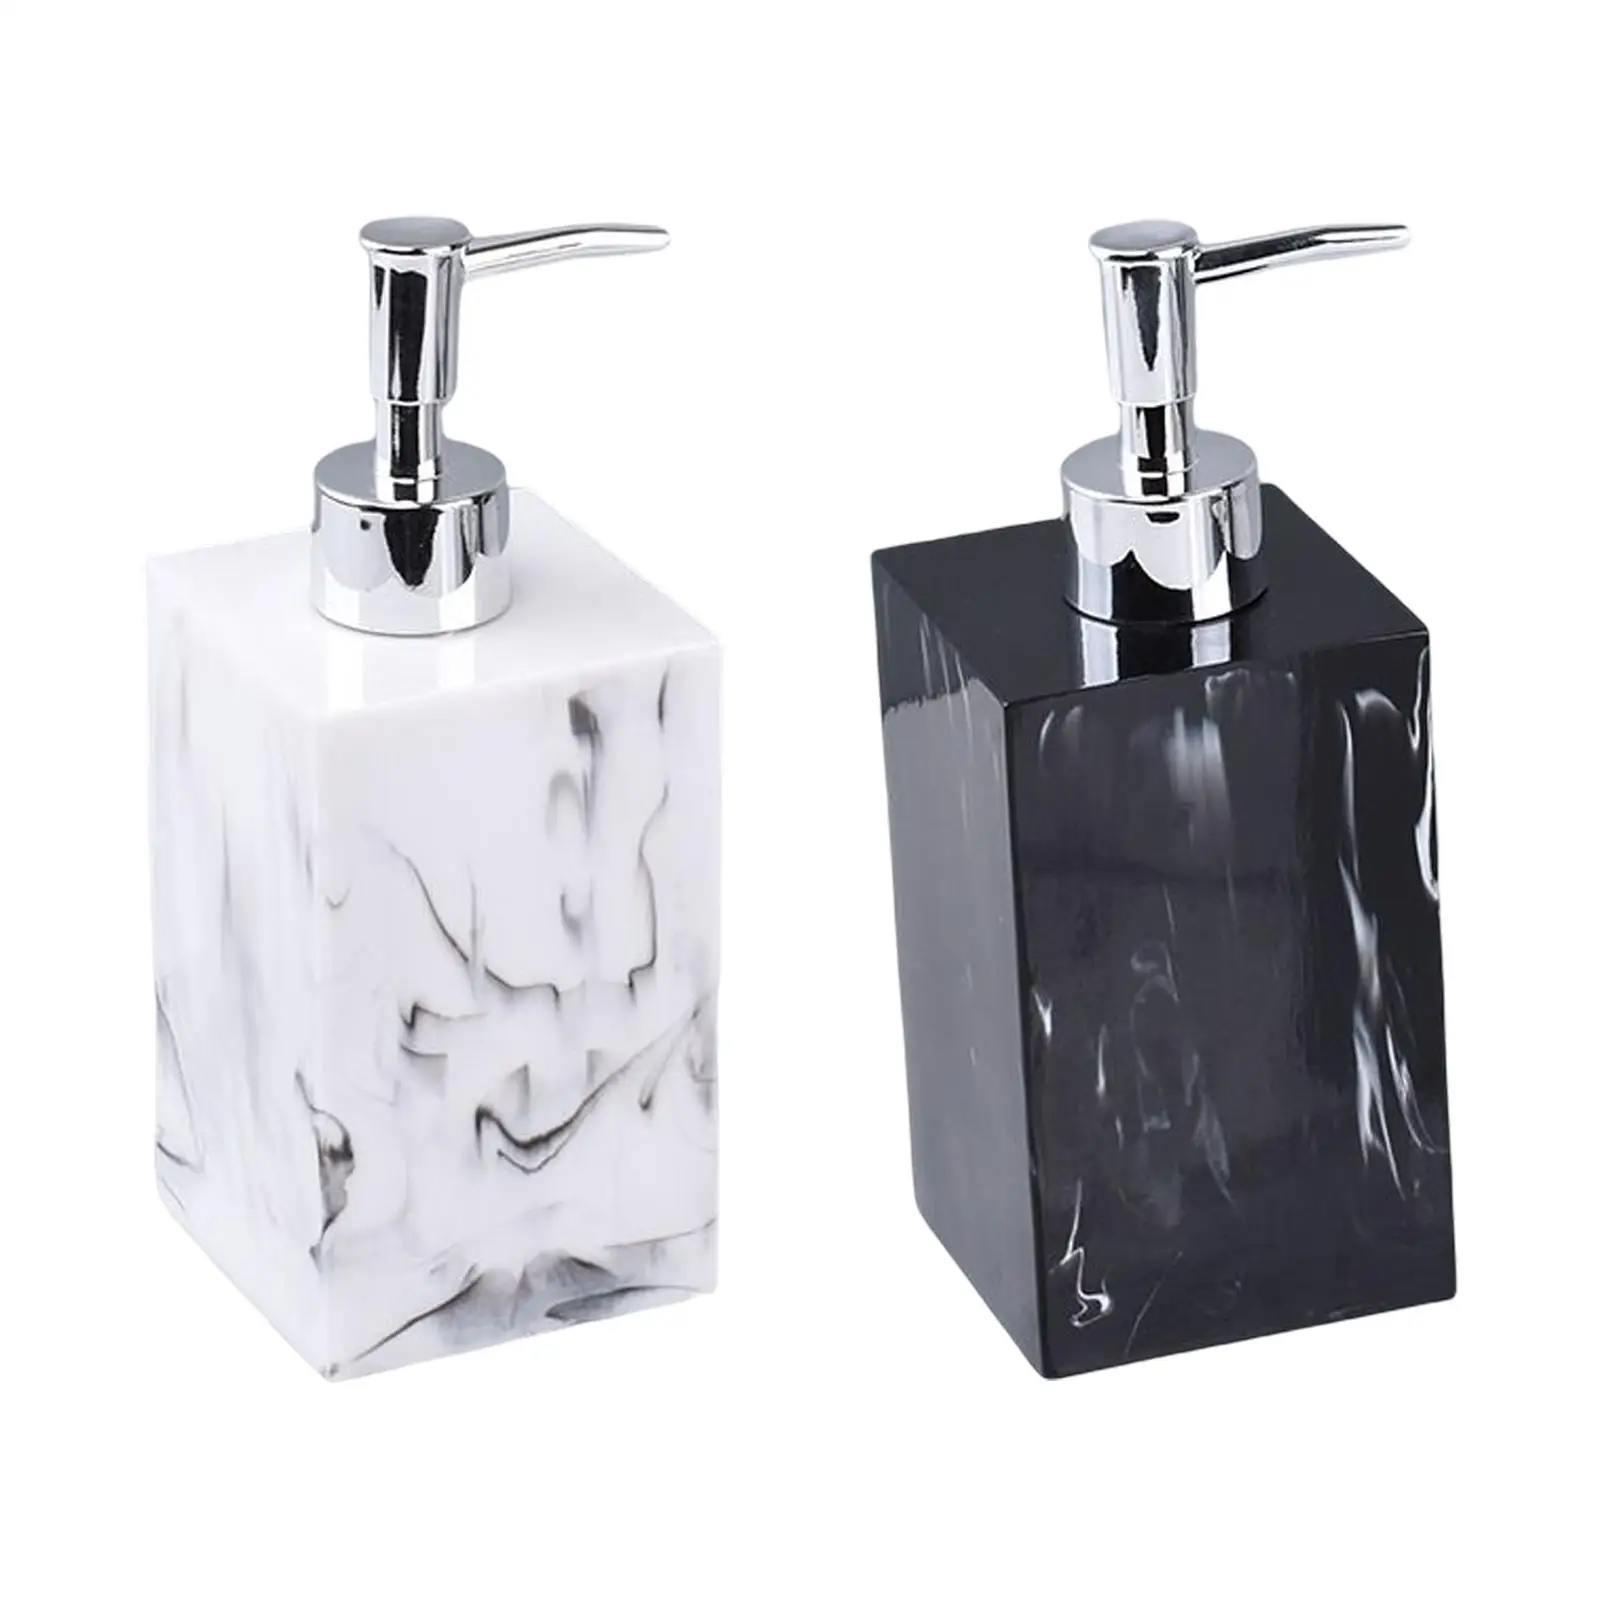 Empty Soap Dispenser Resin with Pump/ 500ml Refillable Container/ for Conditioner Kitchen Hotel Home/